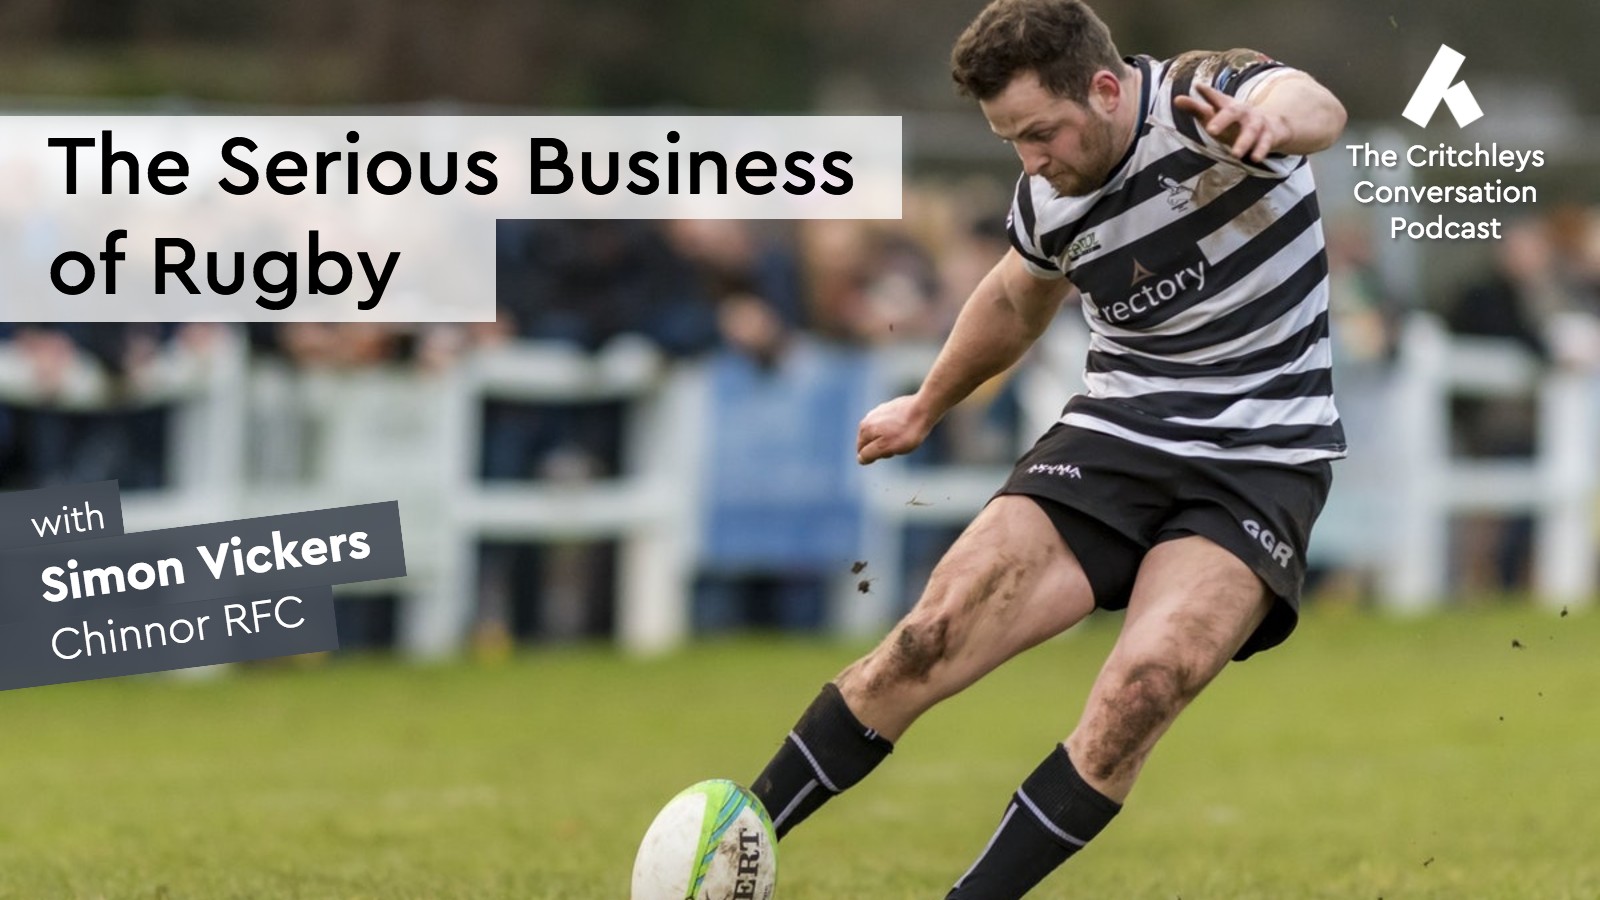 The Serious Business of Rugby